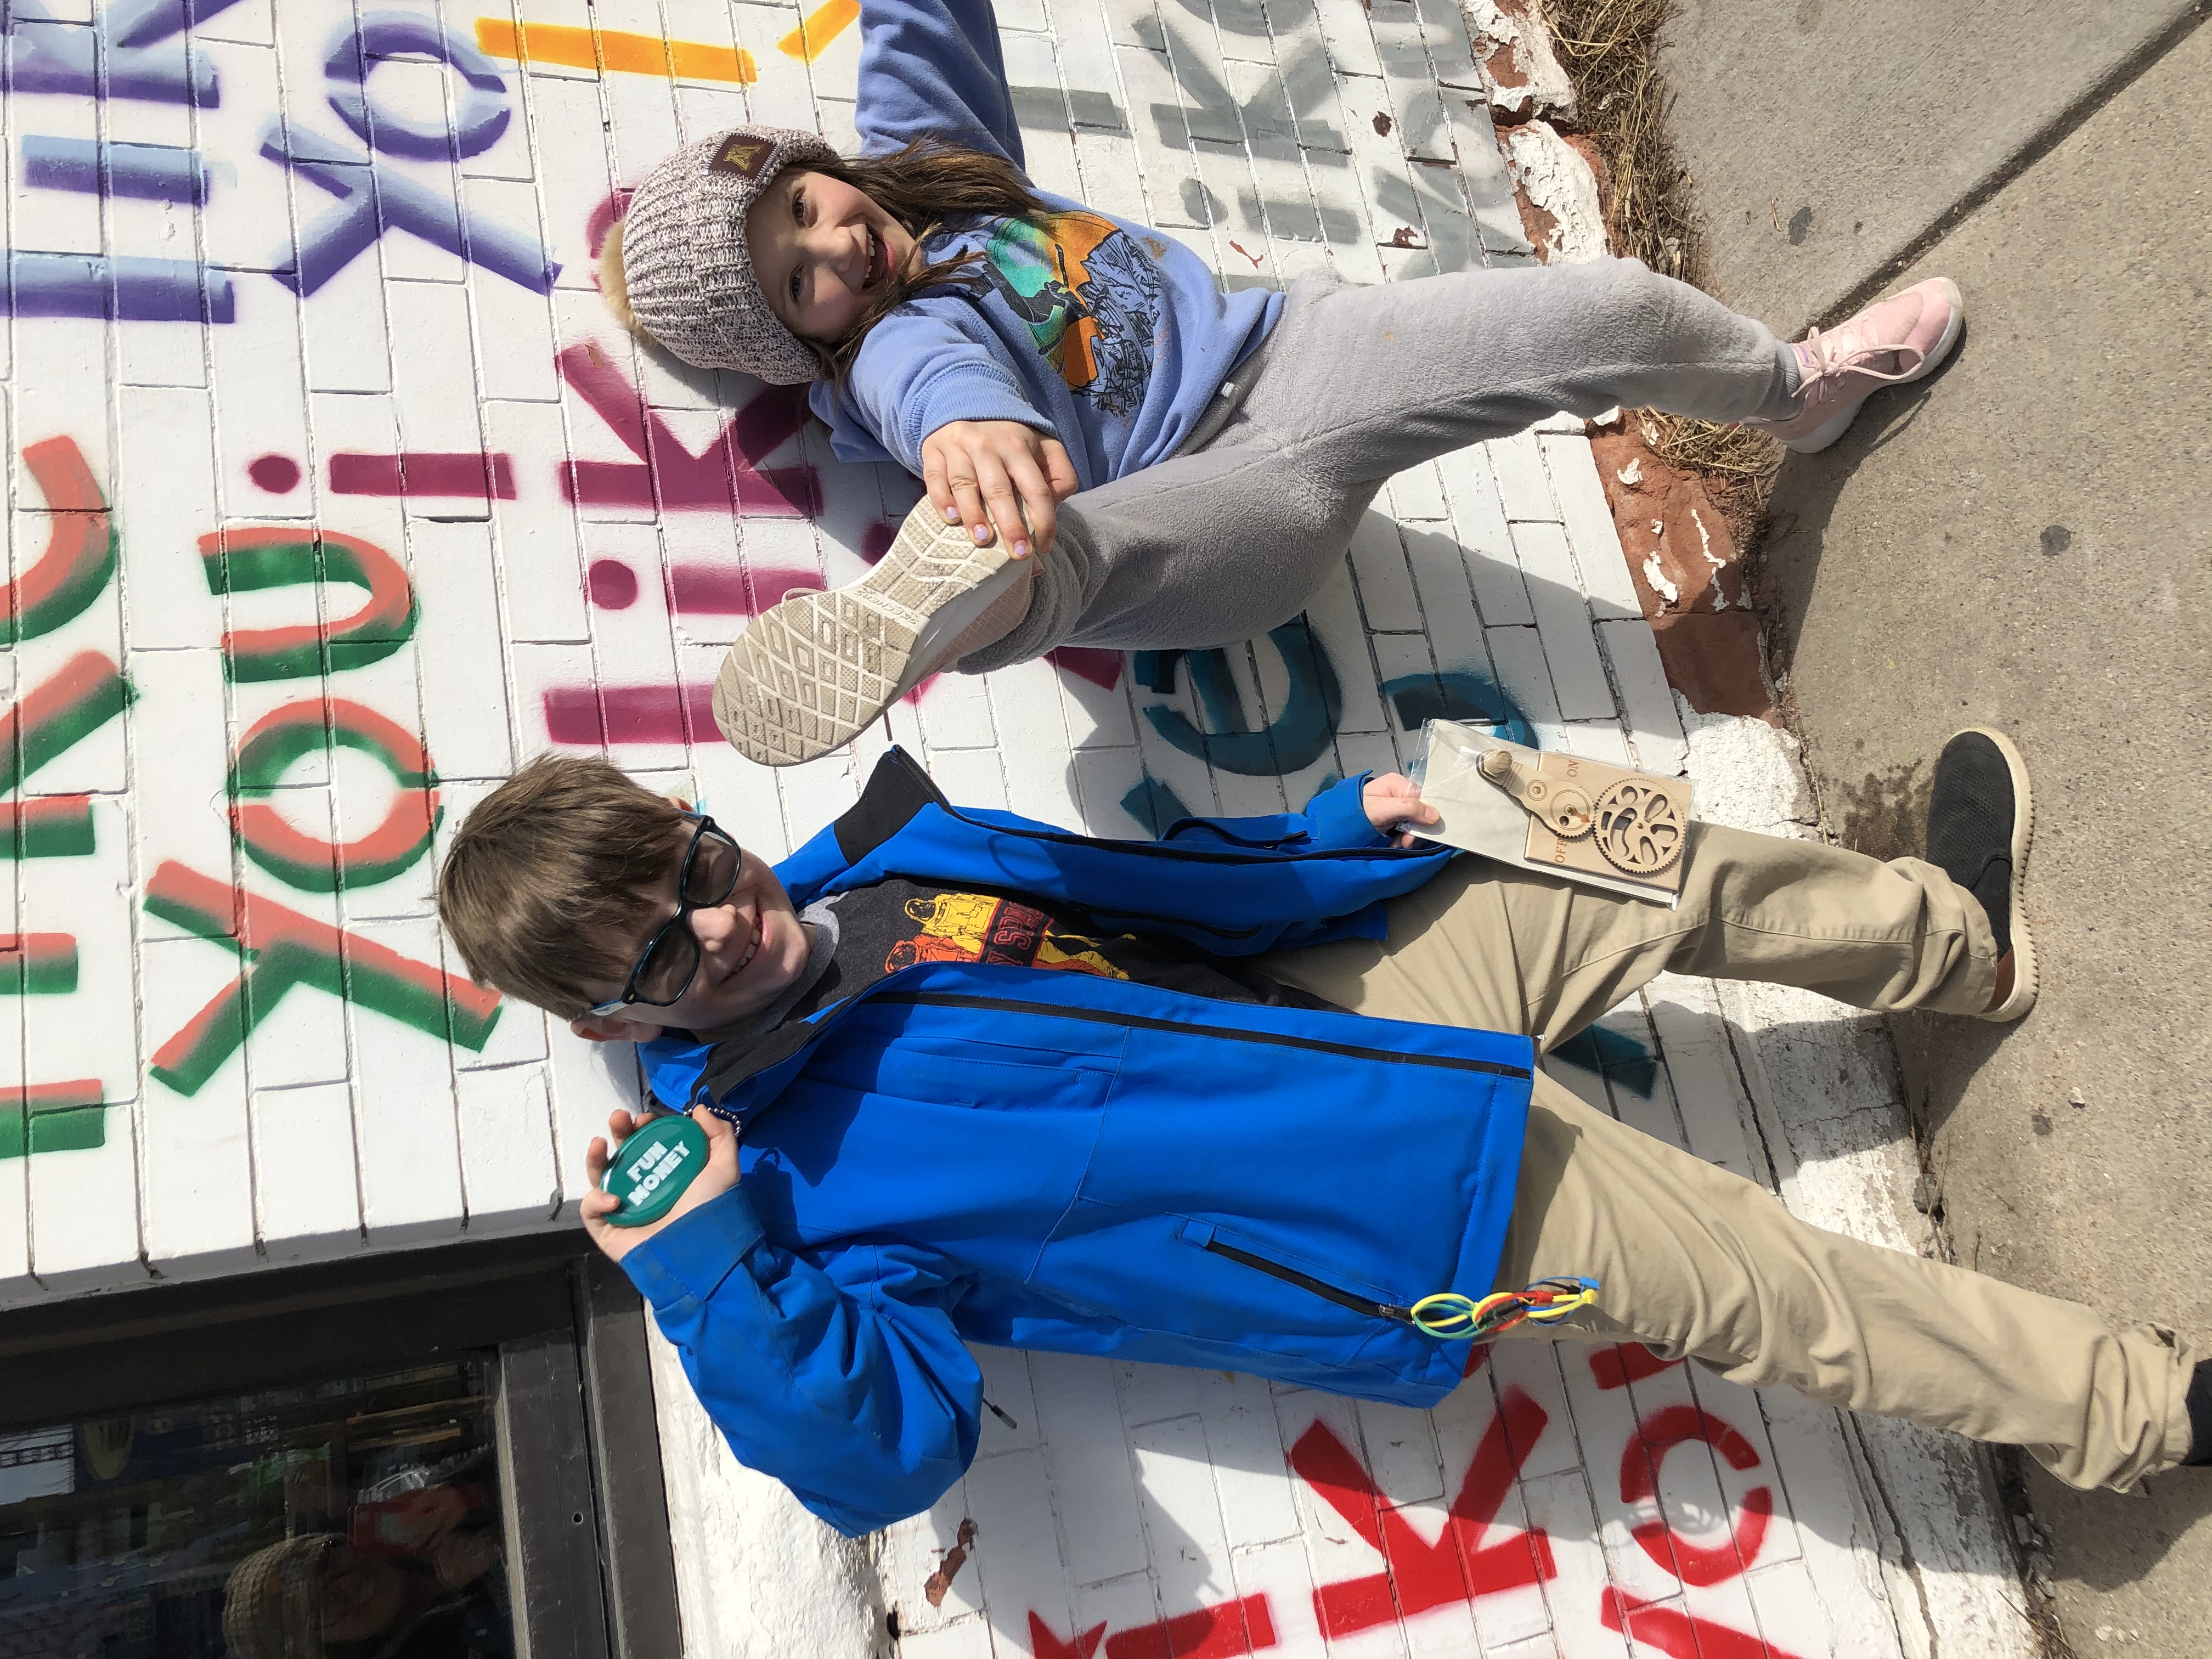 A picture of two children together in front of a painted brick mural.